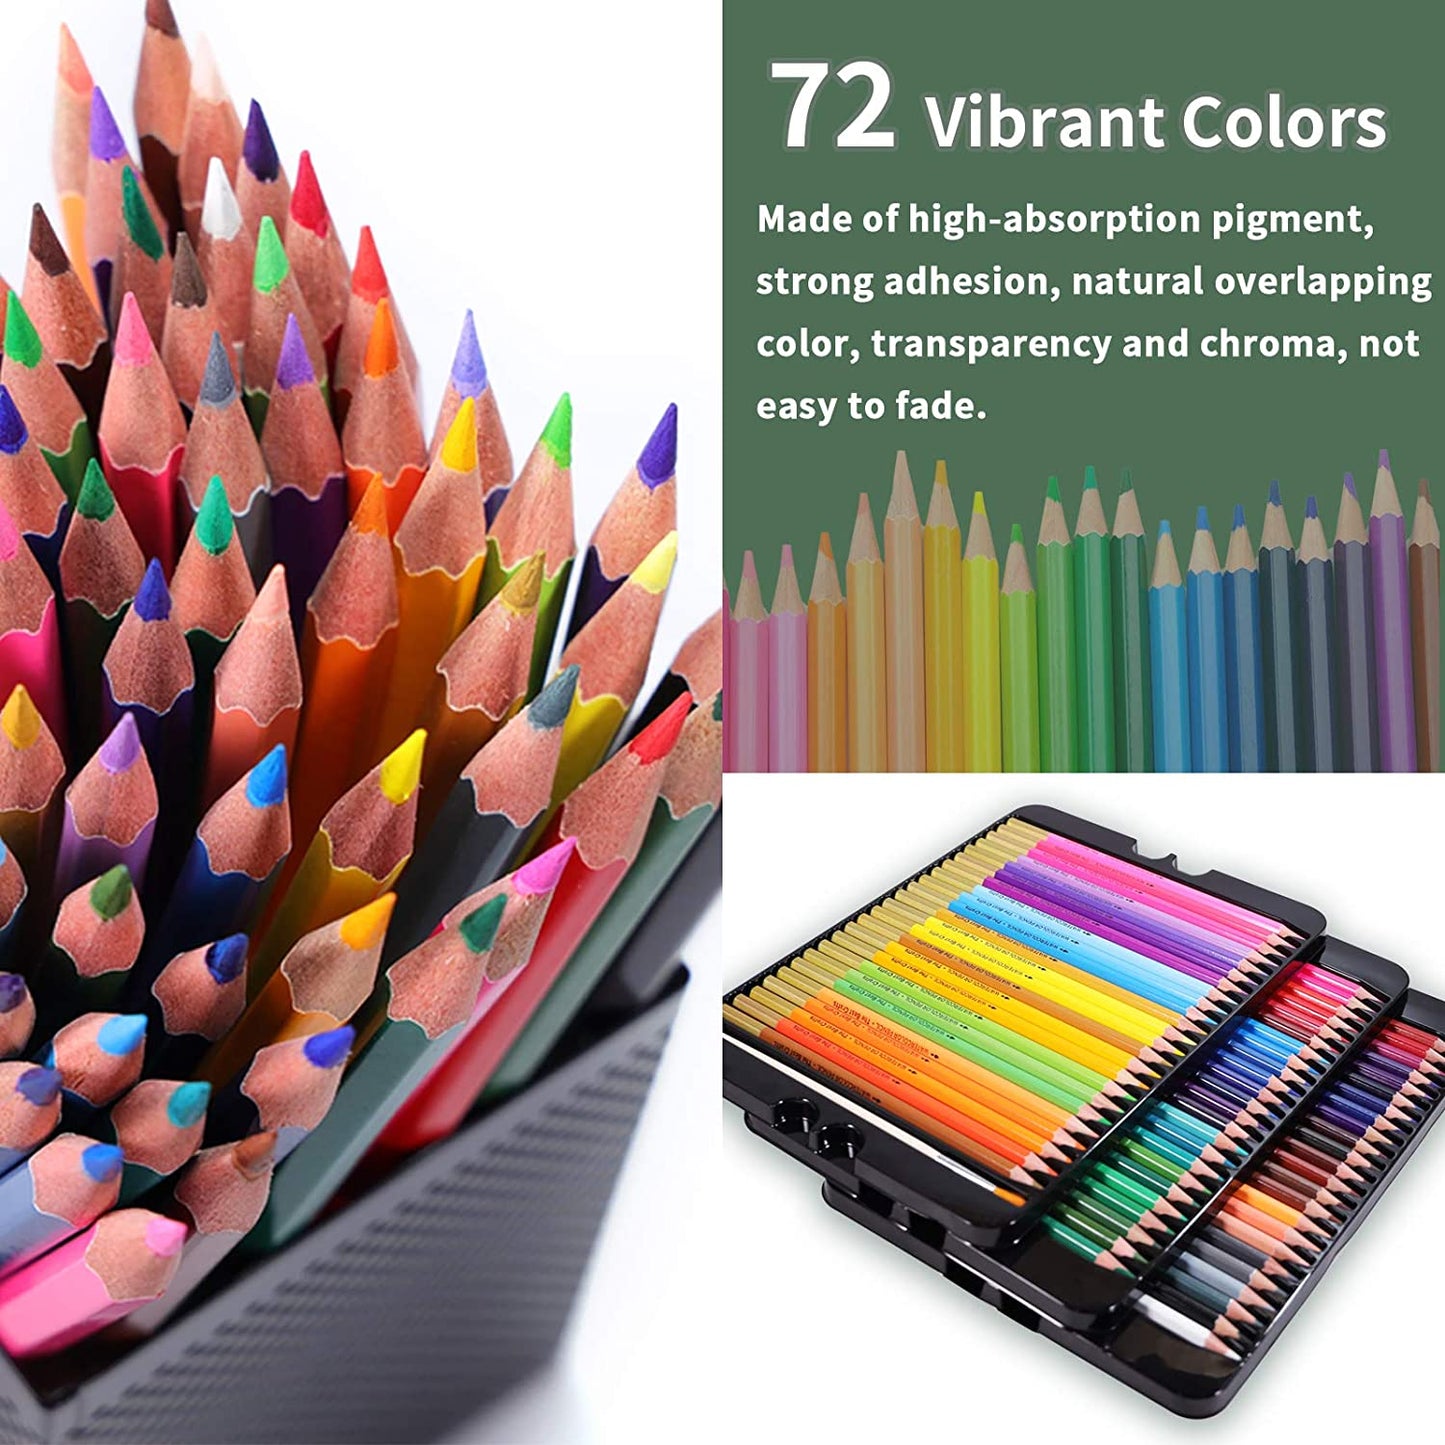 The set of 72 TBC professional watercolour pencils are made of high-absorption pigment, are vibrant colours and are not easy to fade - Stationery Island